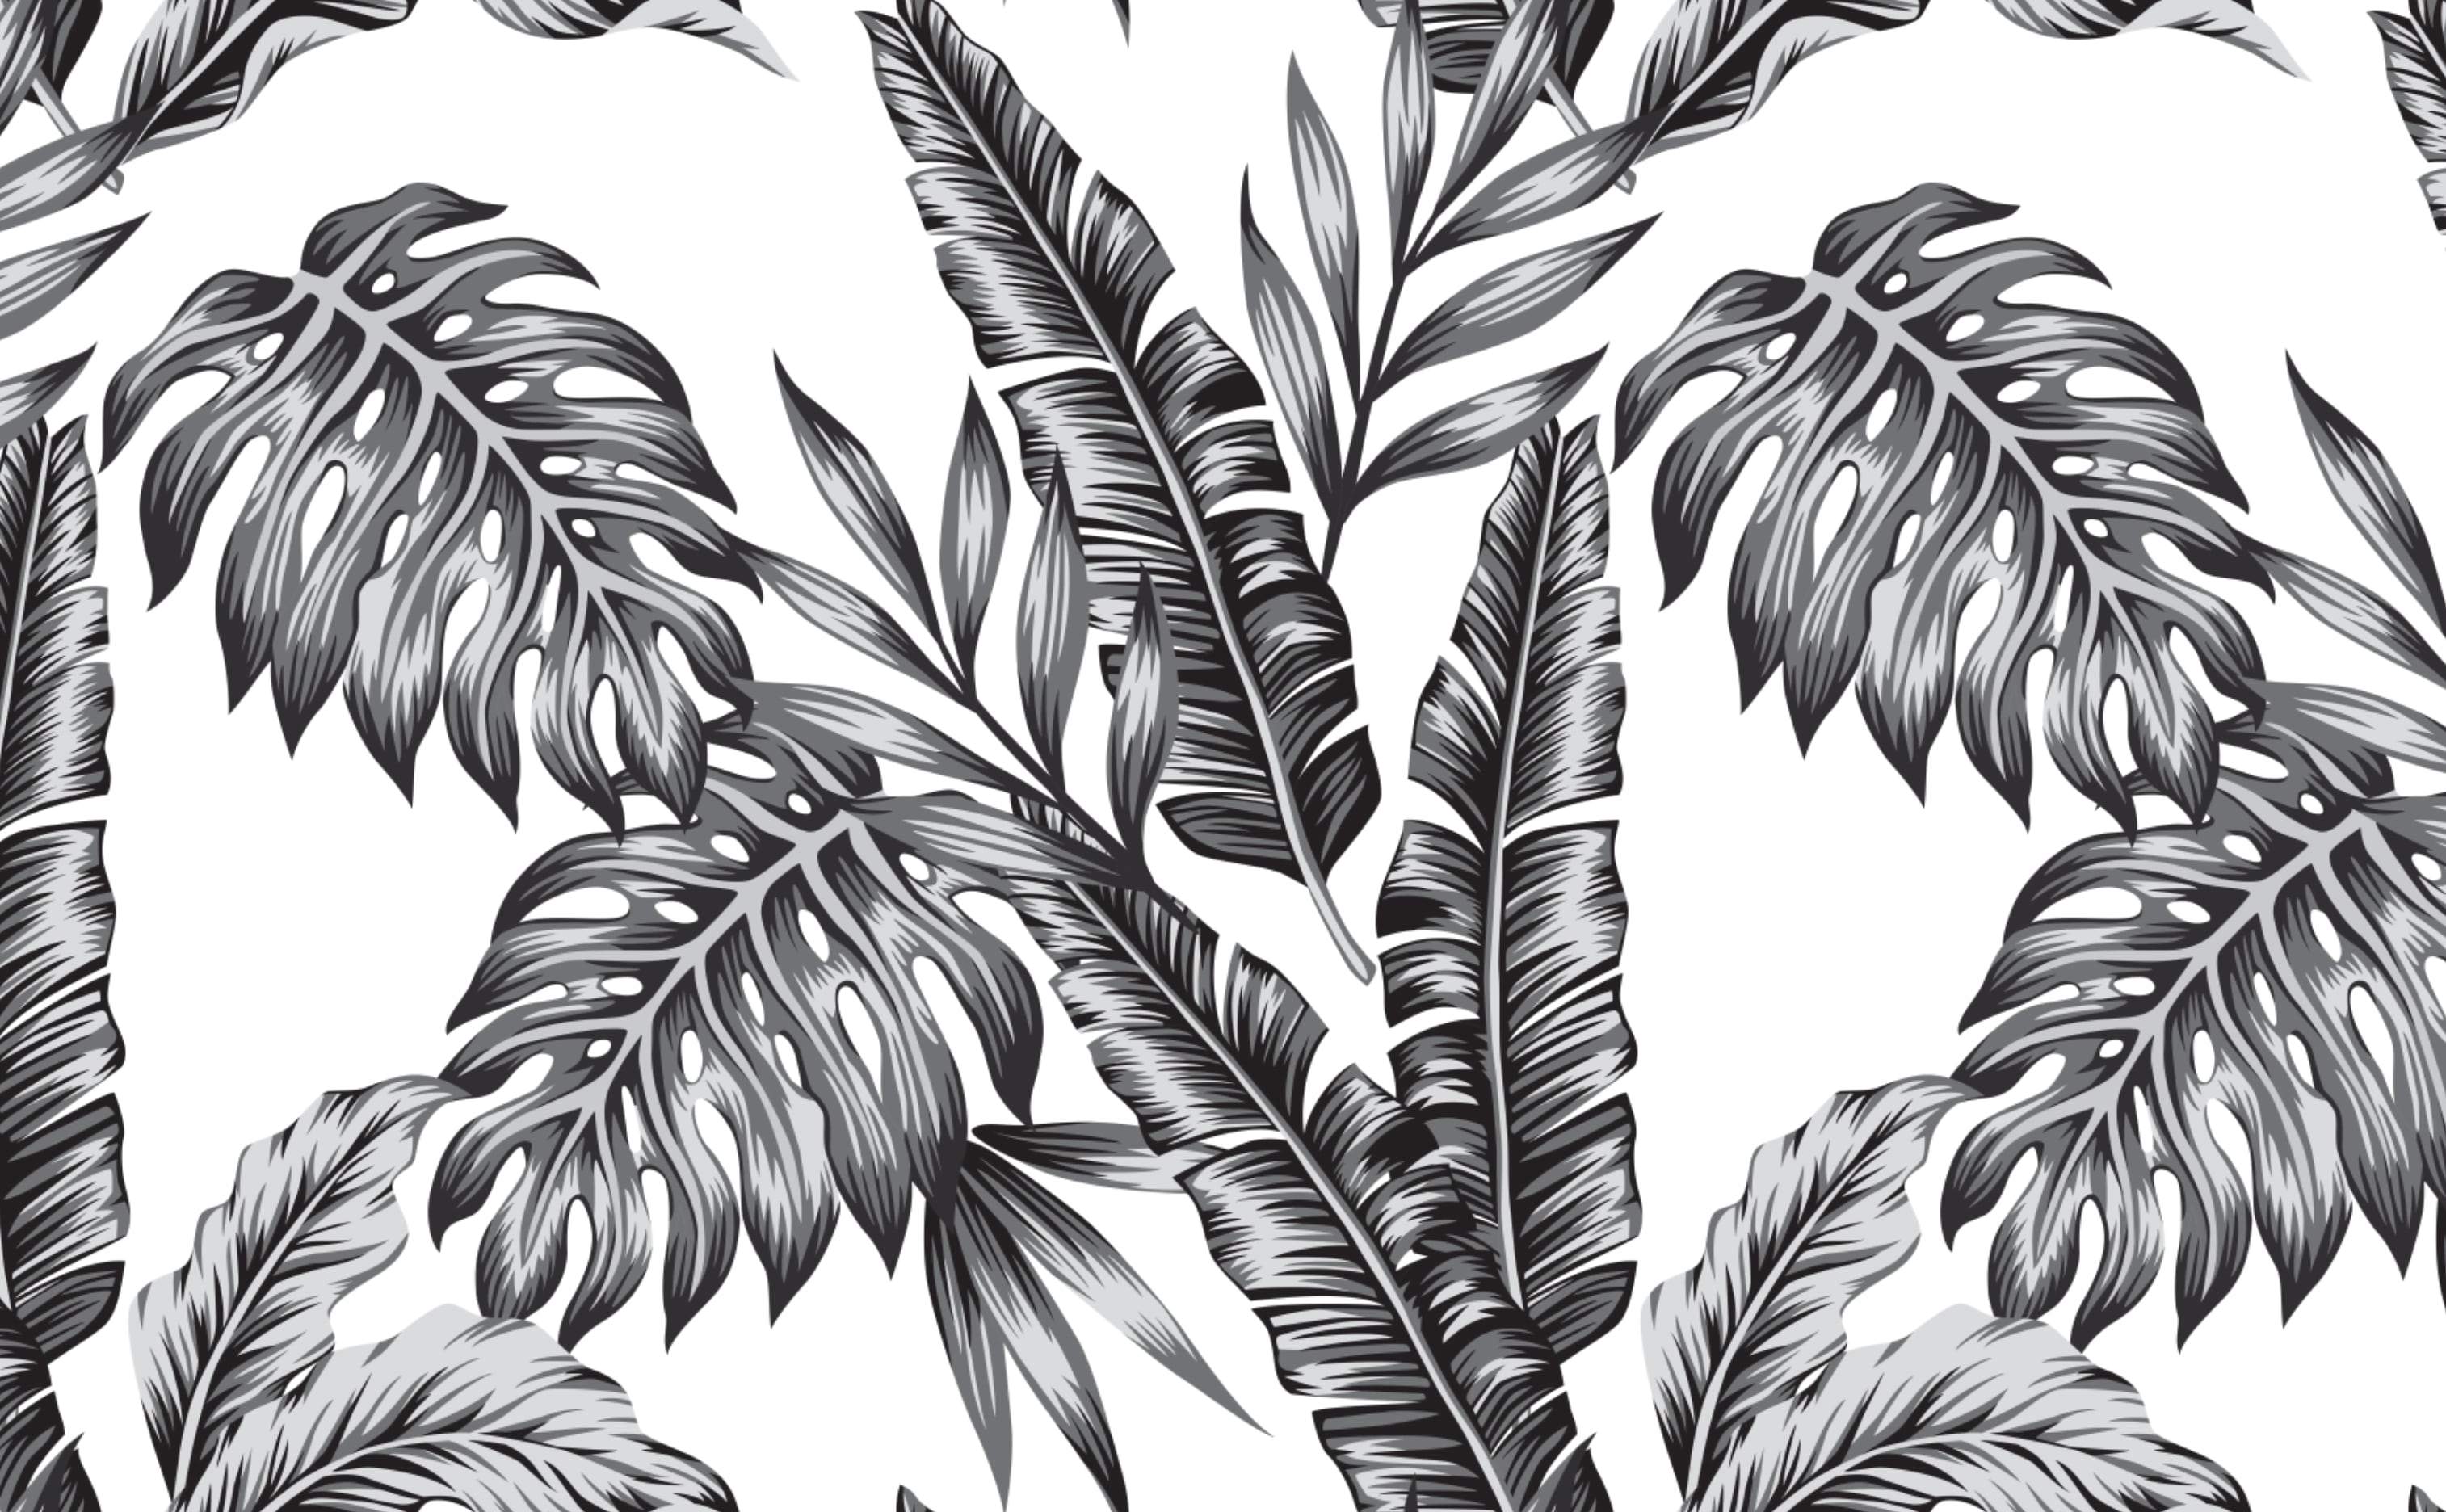 Buy Palm Leaf Wallpaper Black and White Tropical Wallpaper Online in India   Etsy